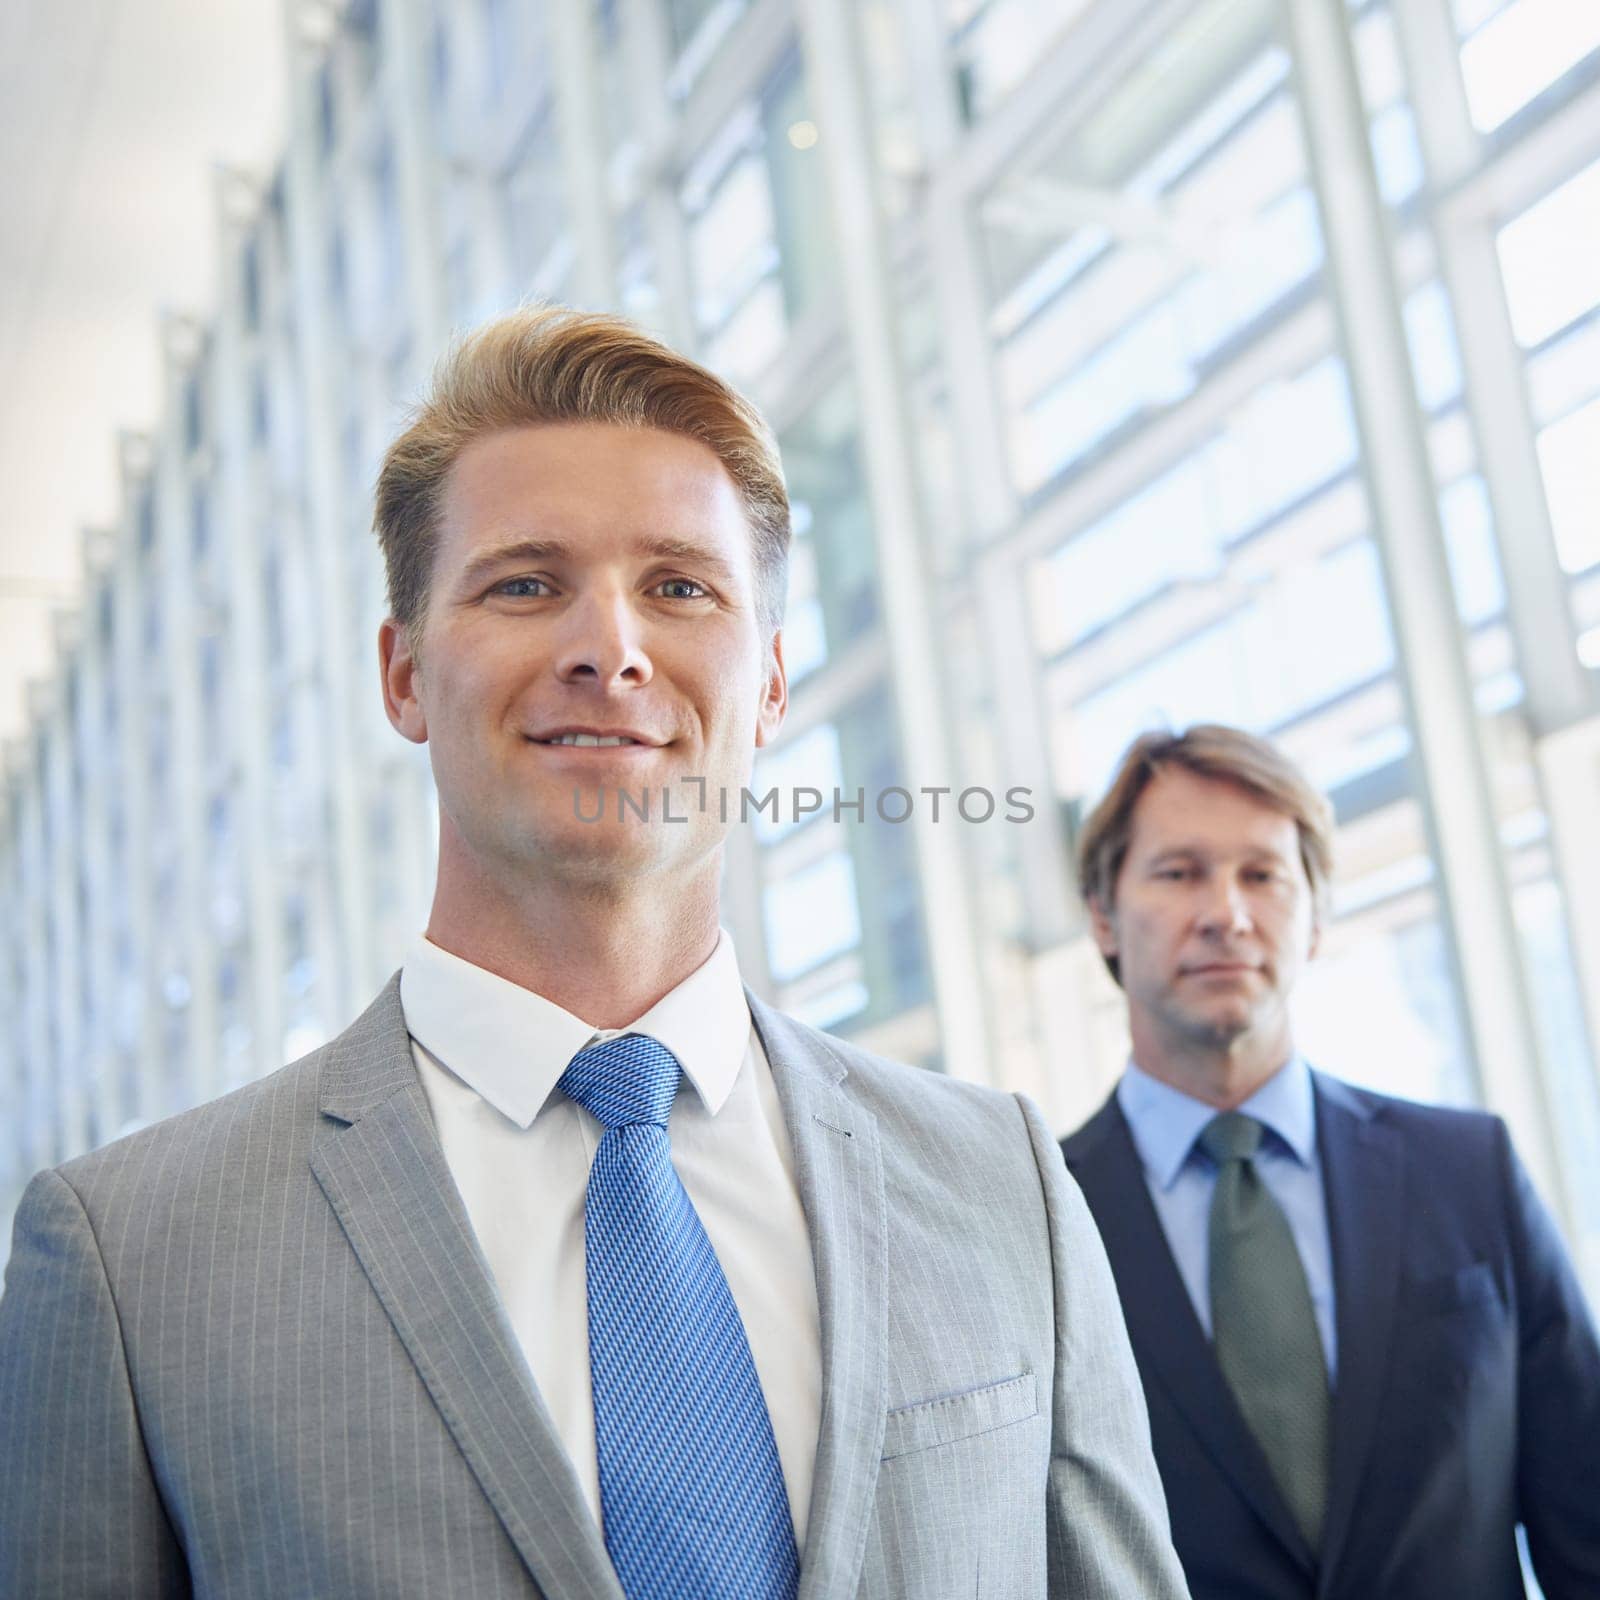 Rising young talent of the company. Portrait of a young businessman with his senior colleague standing behind him